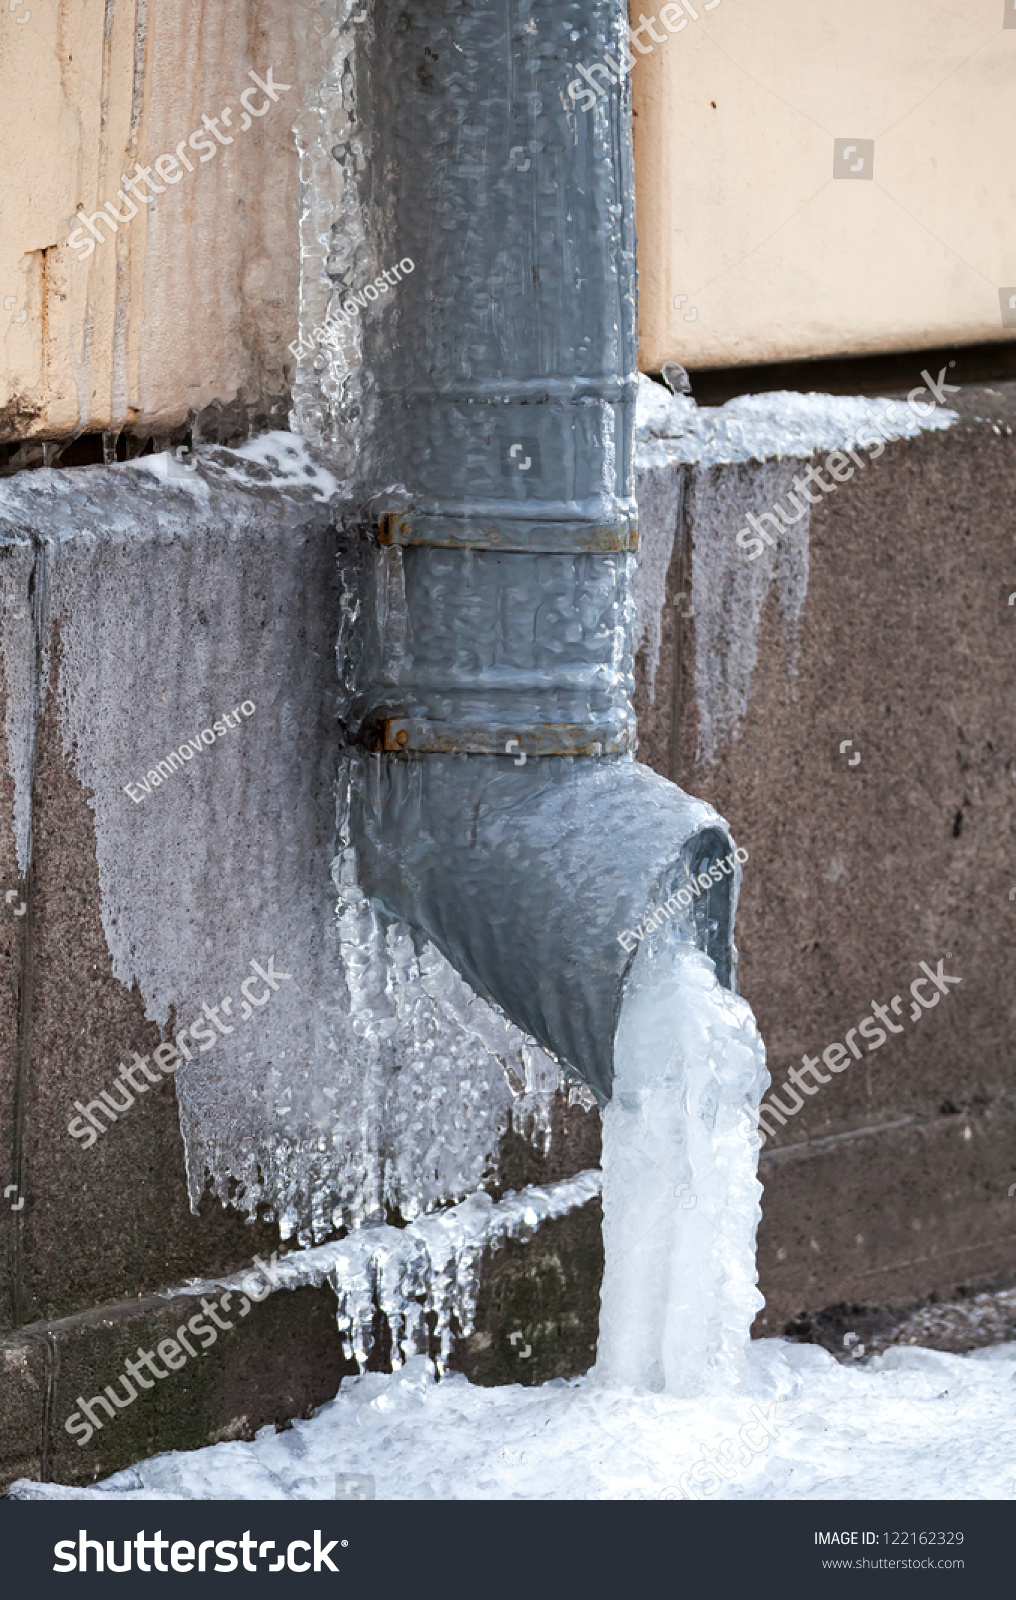 Winter city fragment. Icicles and frost on drainpipe #122162329